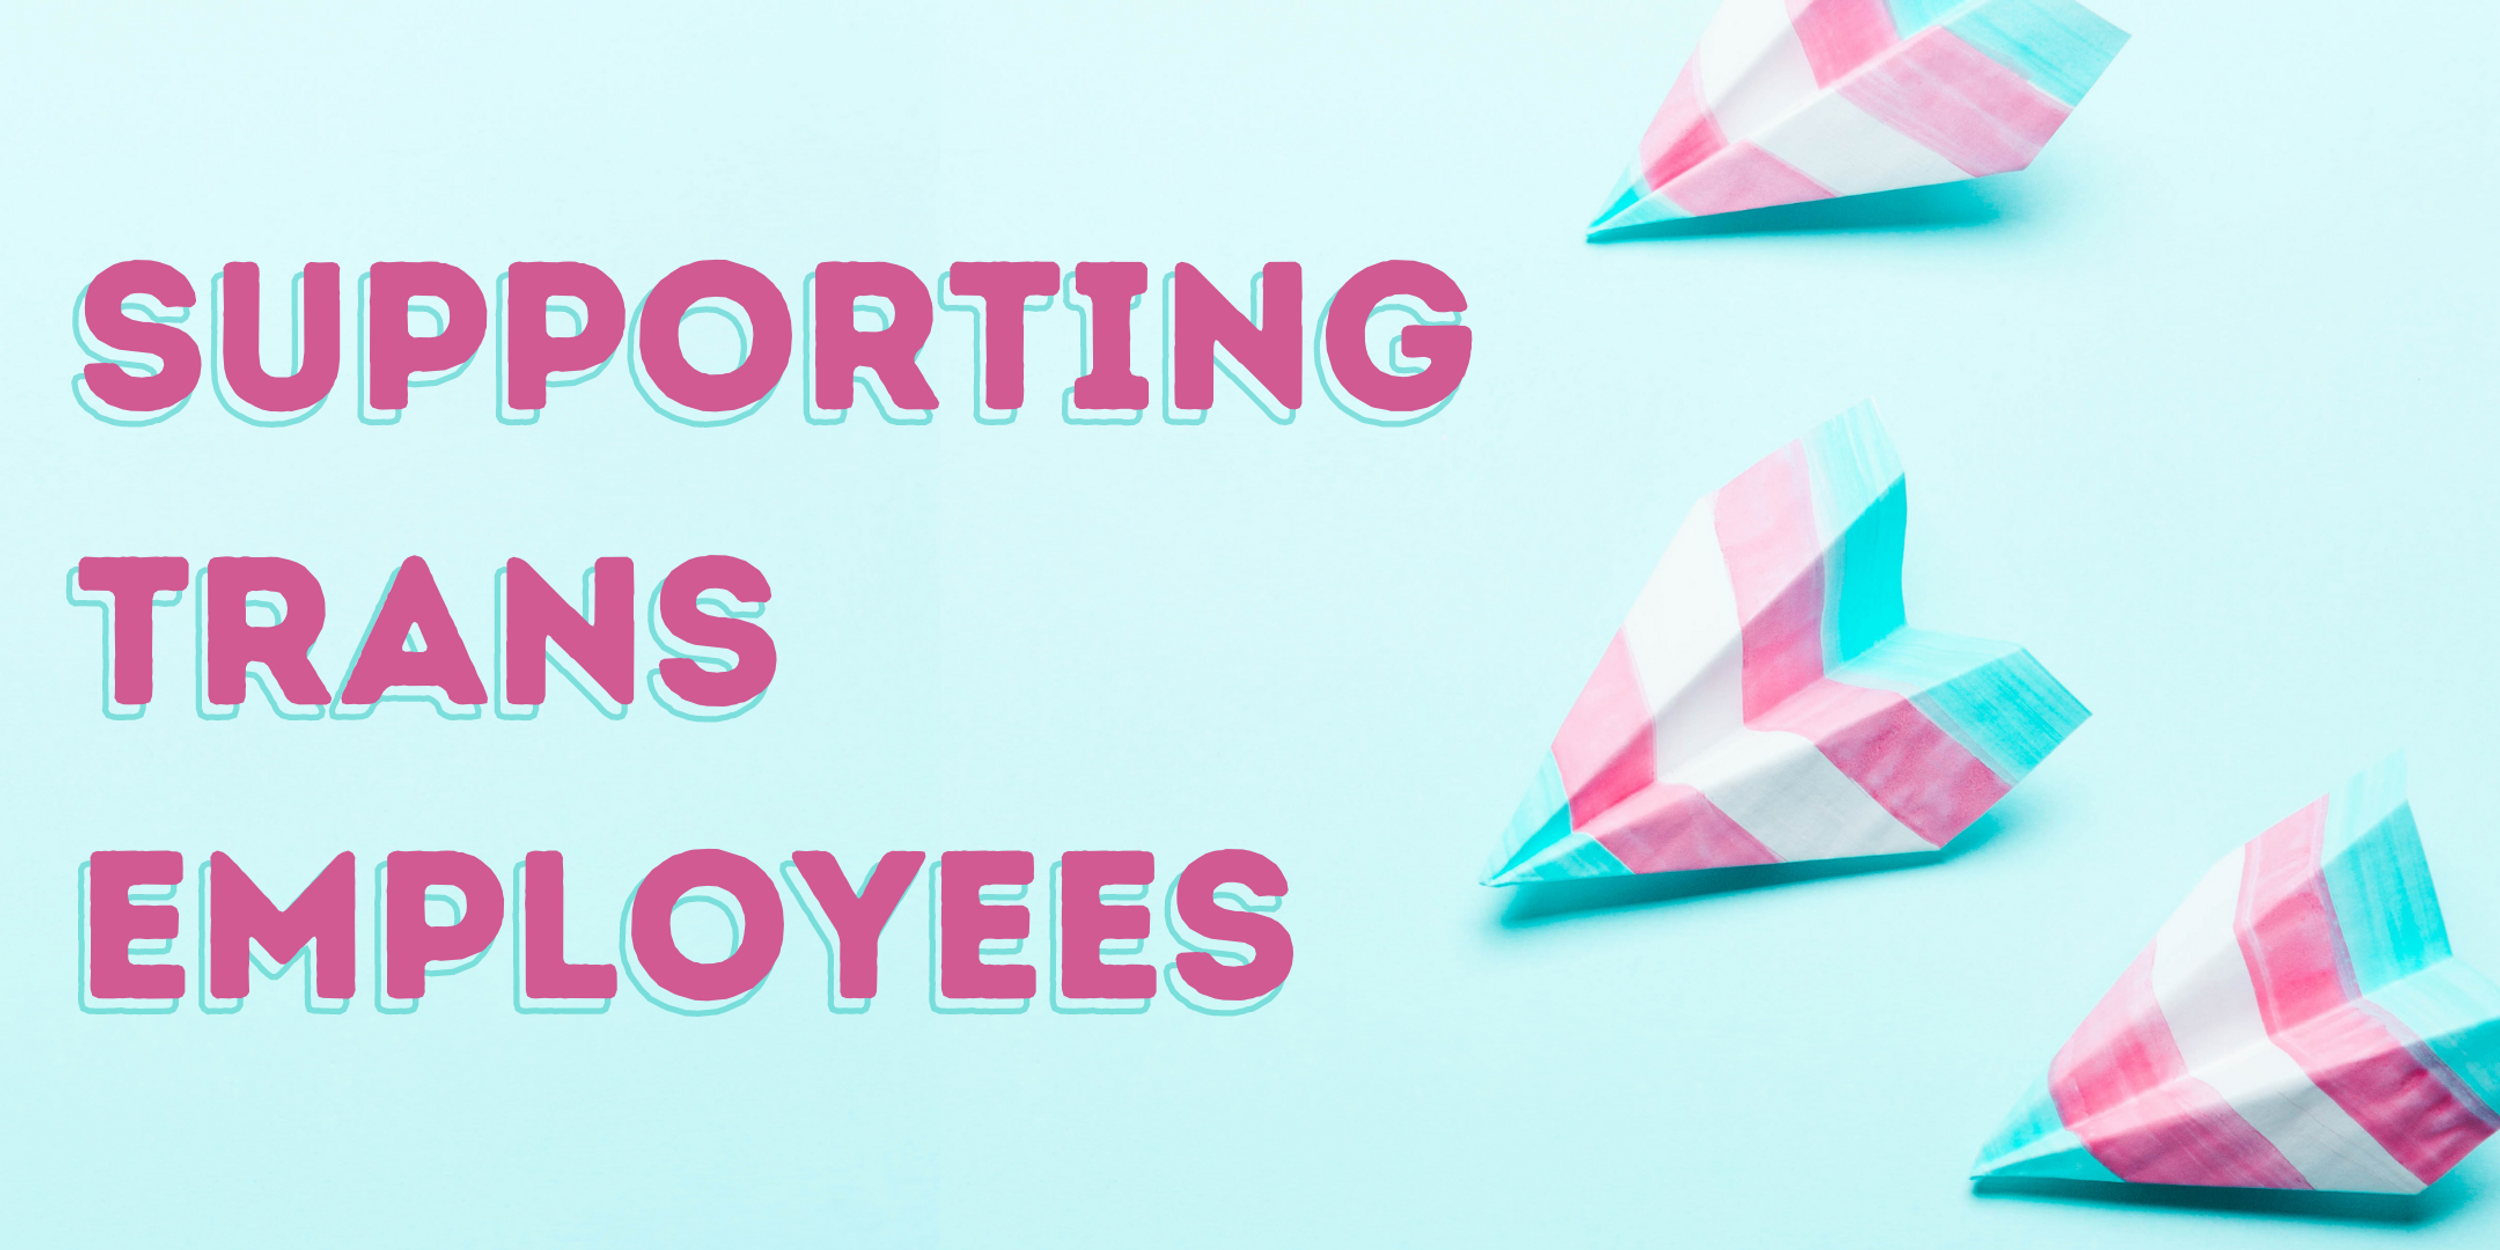 12 Ways Leading Companies are Supporting Transgender Employees